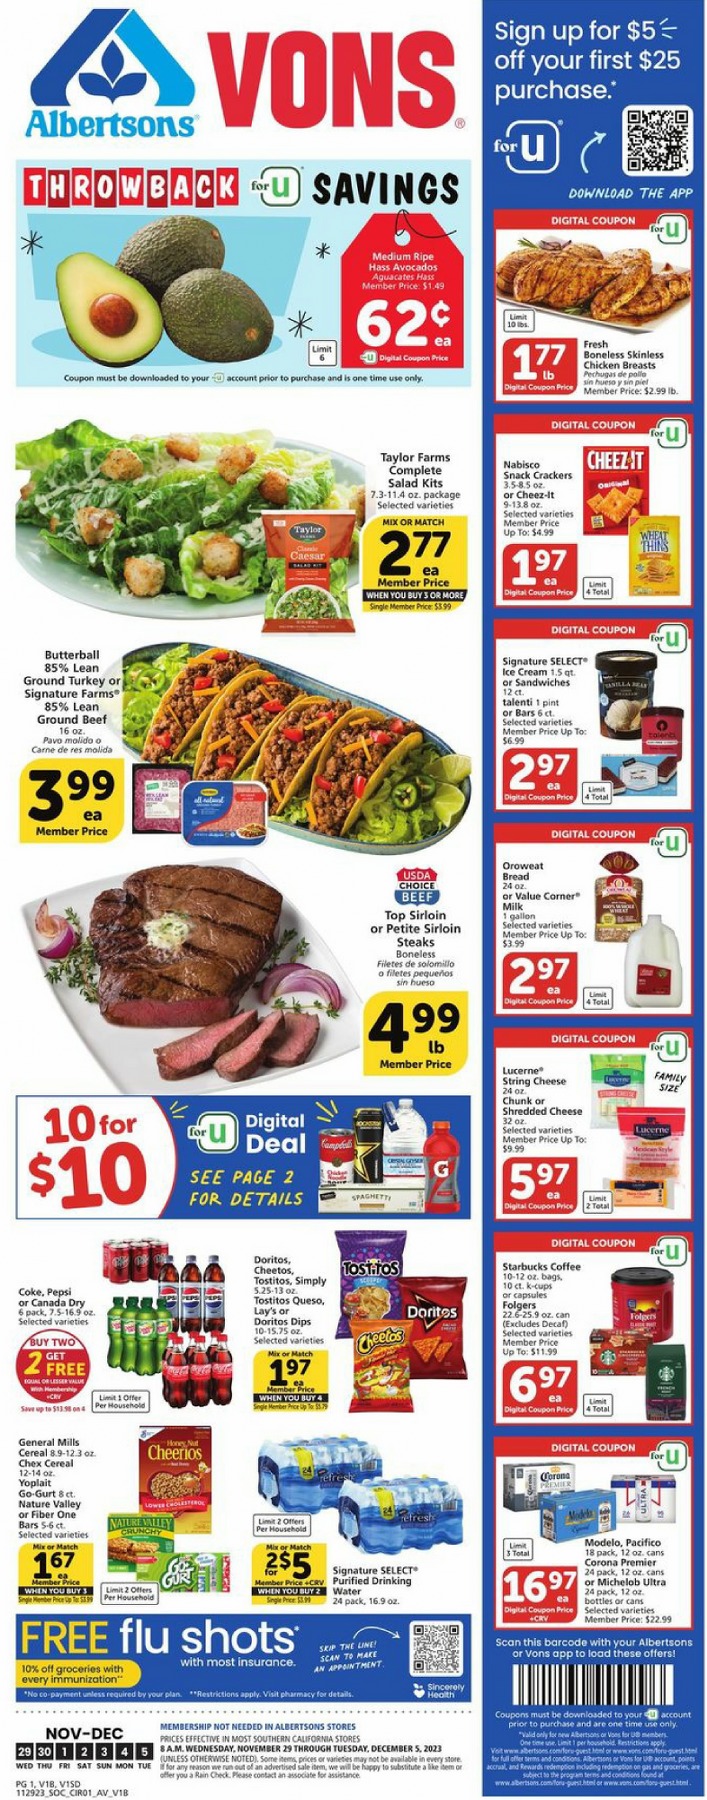 Vons Weekly Ad November 29 to December 5, 2023 1 – vons ad 1 3